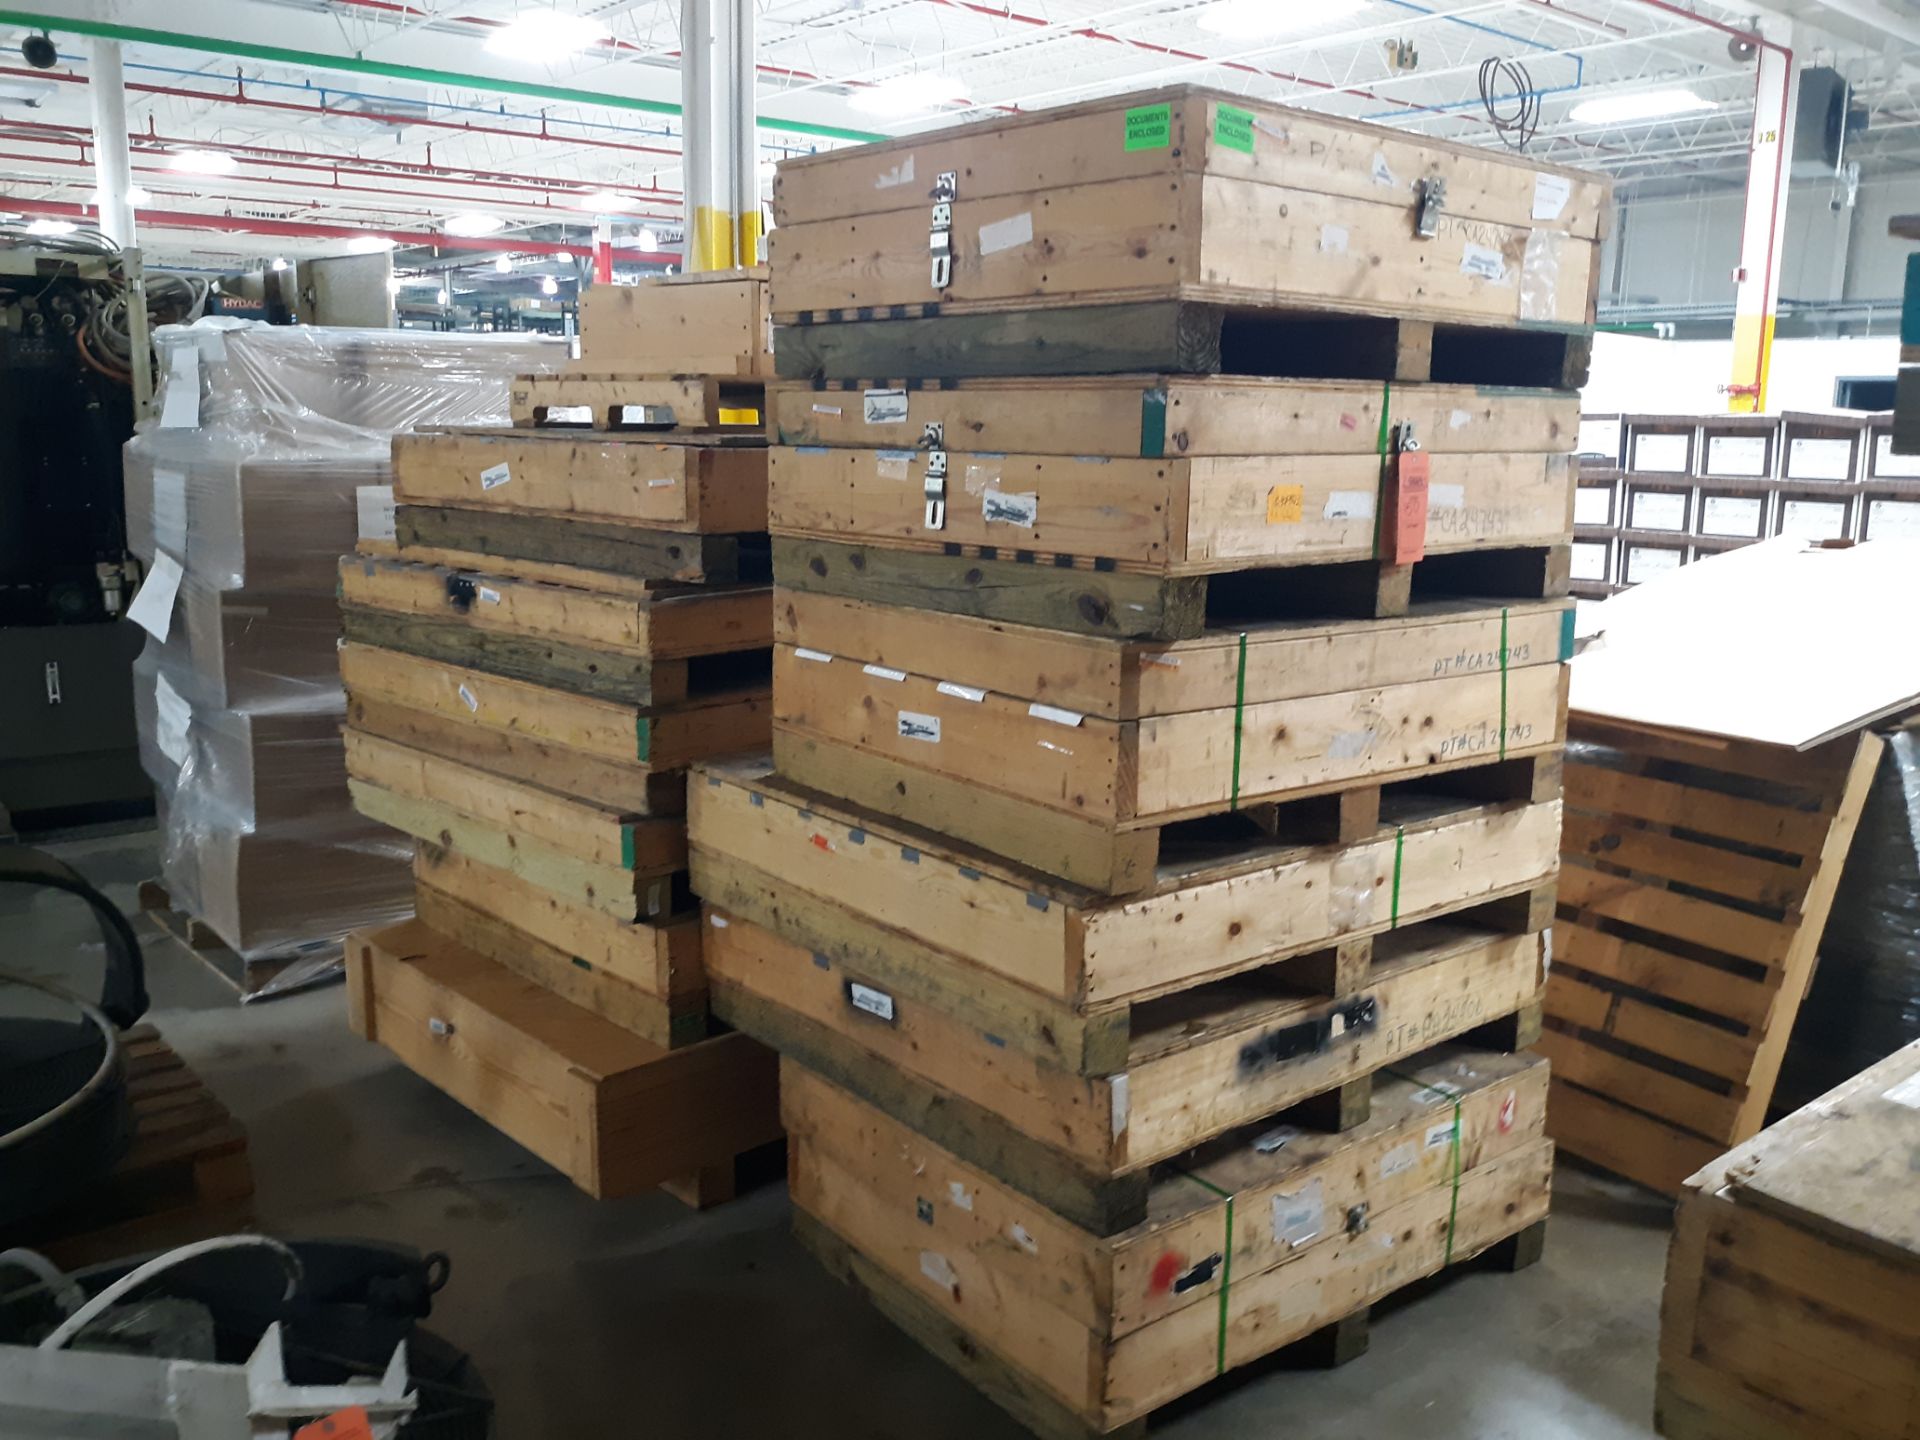 (2) STACKS OF SHIPPING/STORAGE CRATES FOR MACHINERY TOOLING ; RIGGING FEE: $10